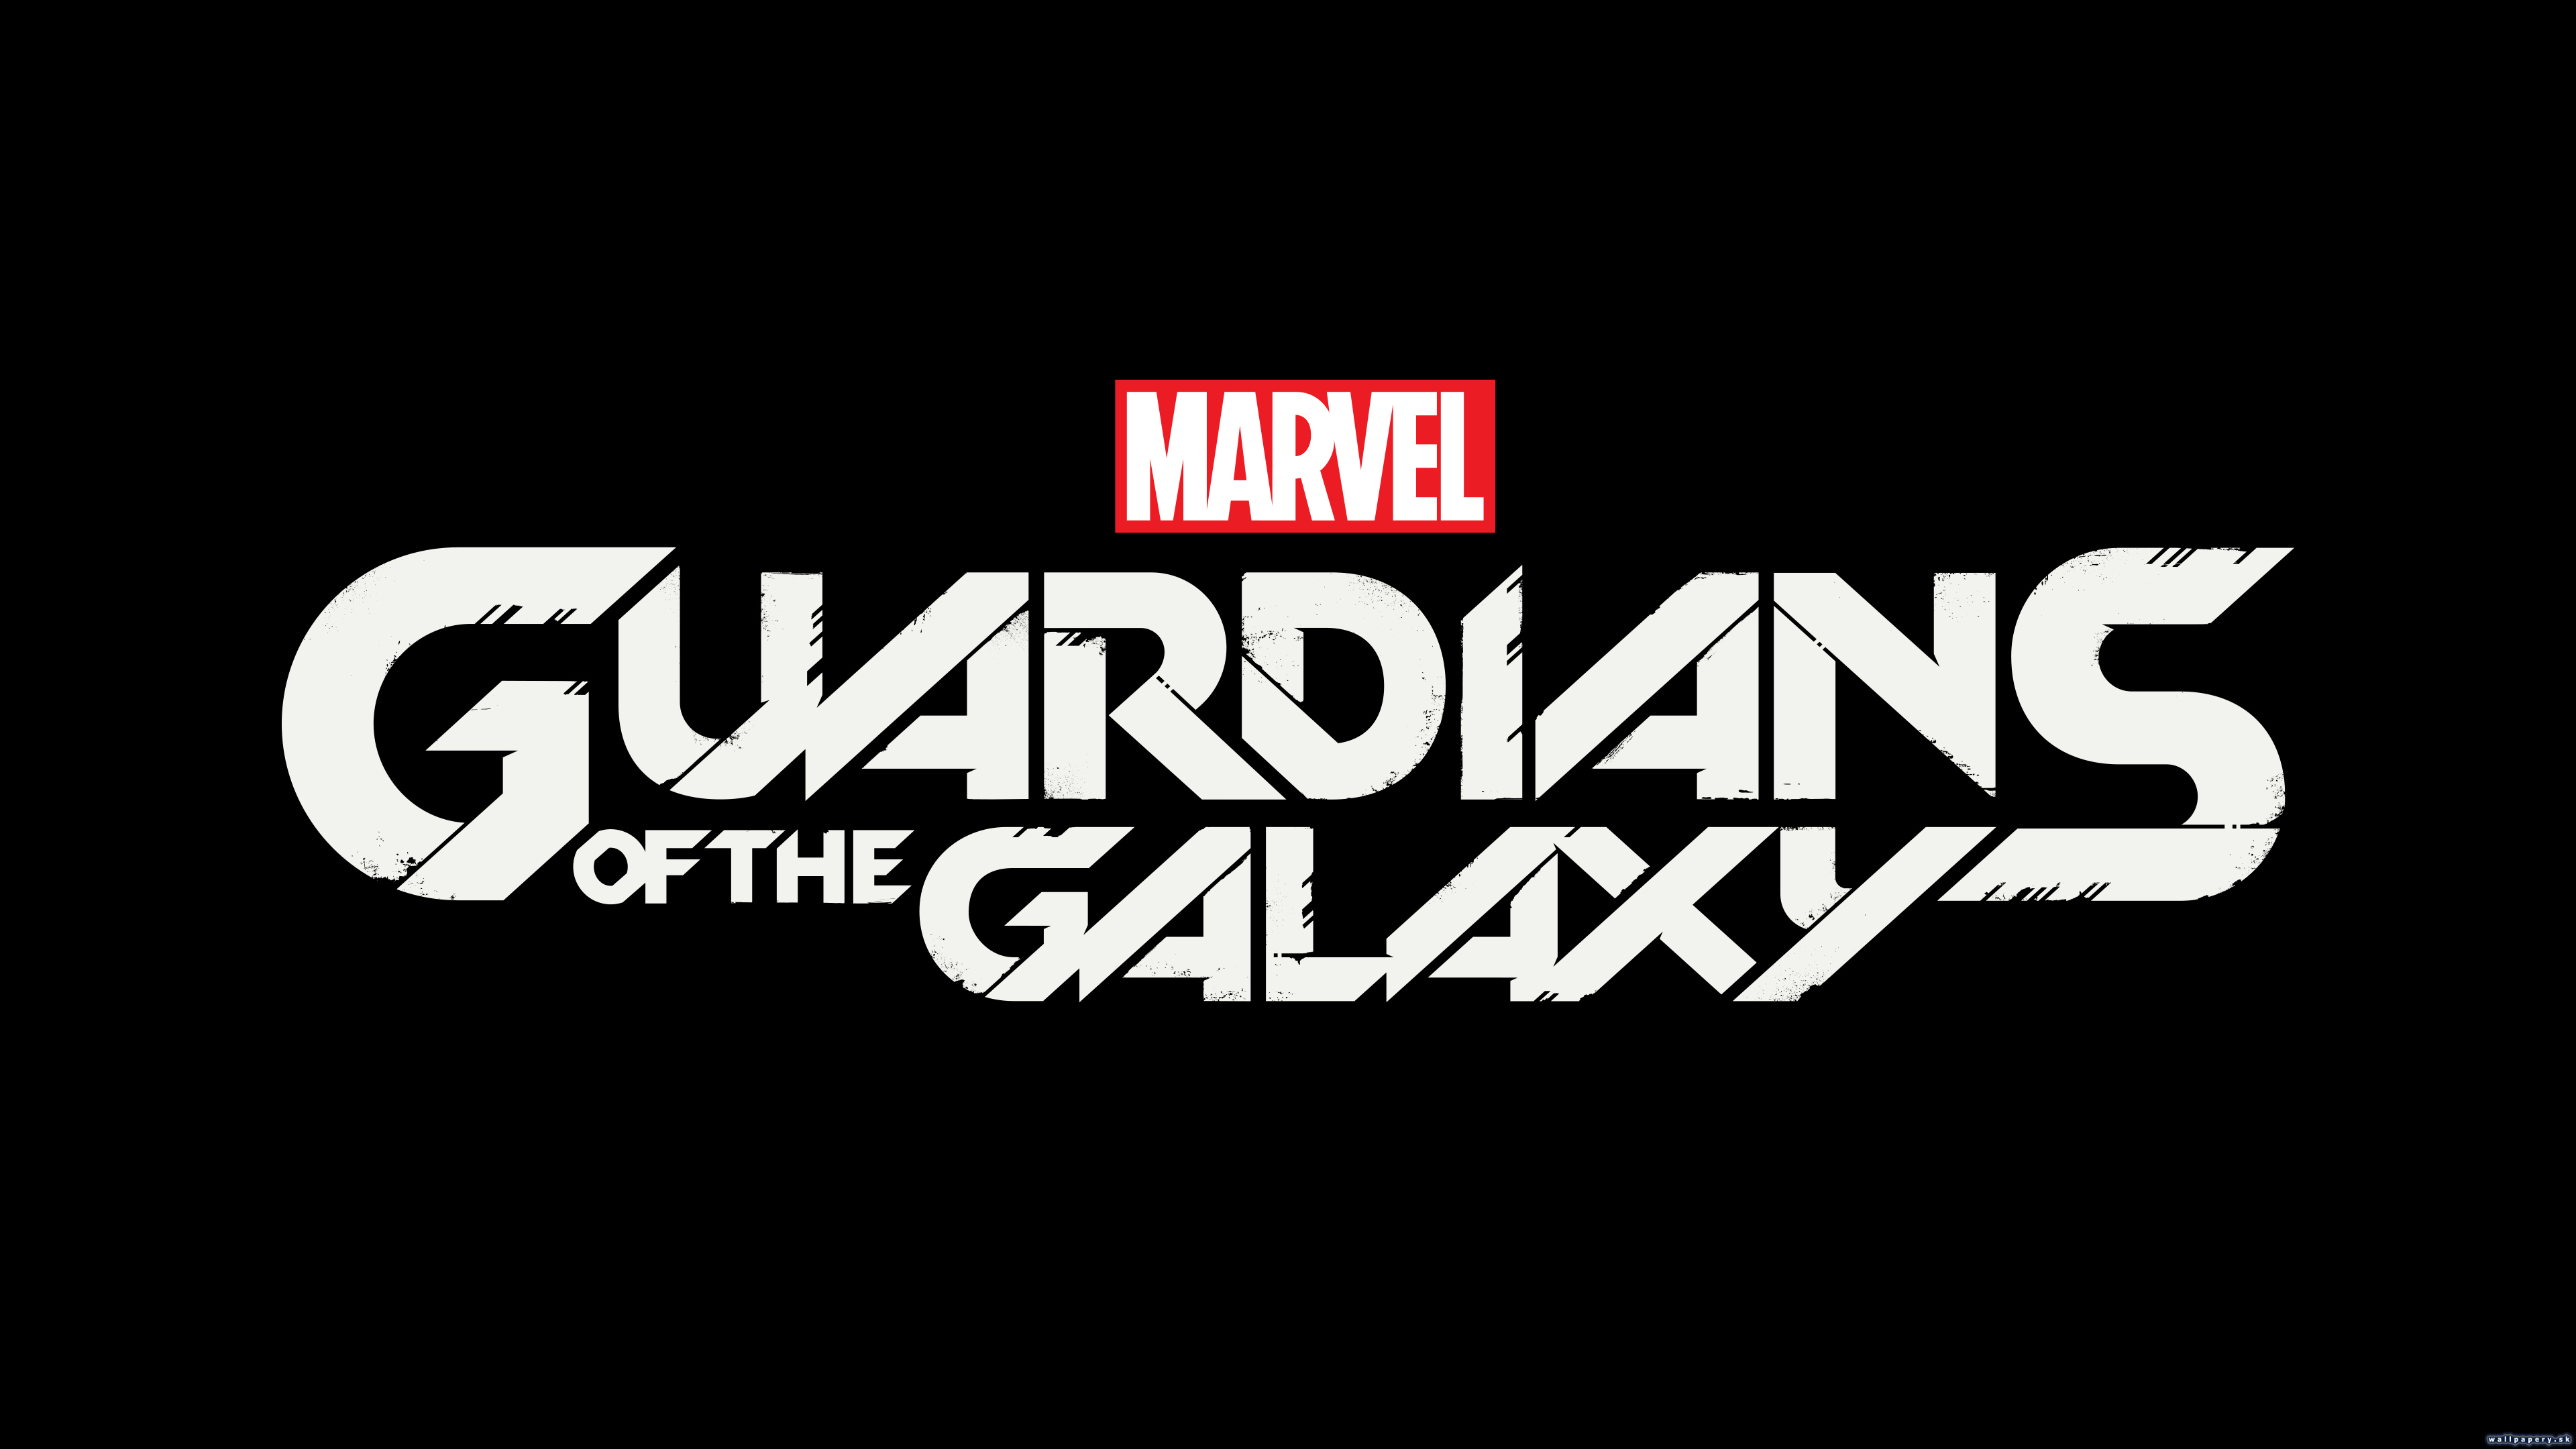 Guardians of the Galaxy - wallpaper 2